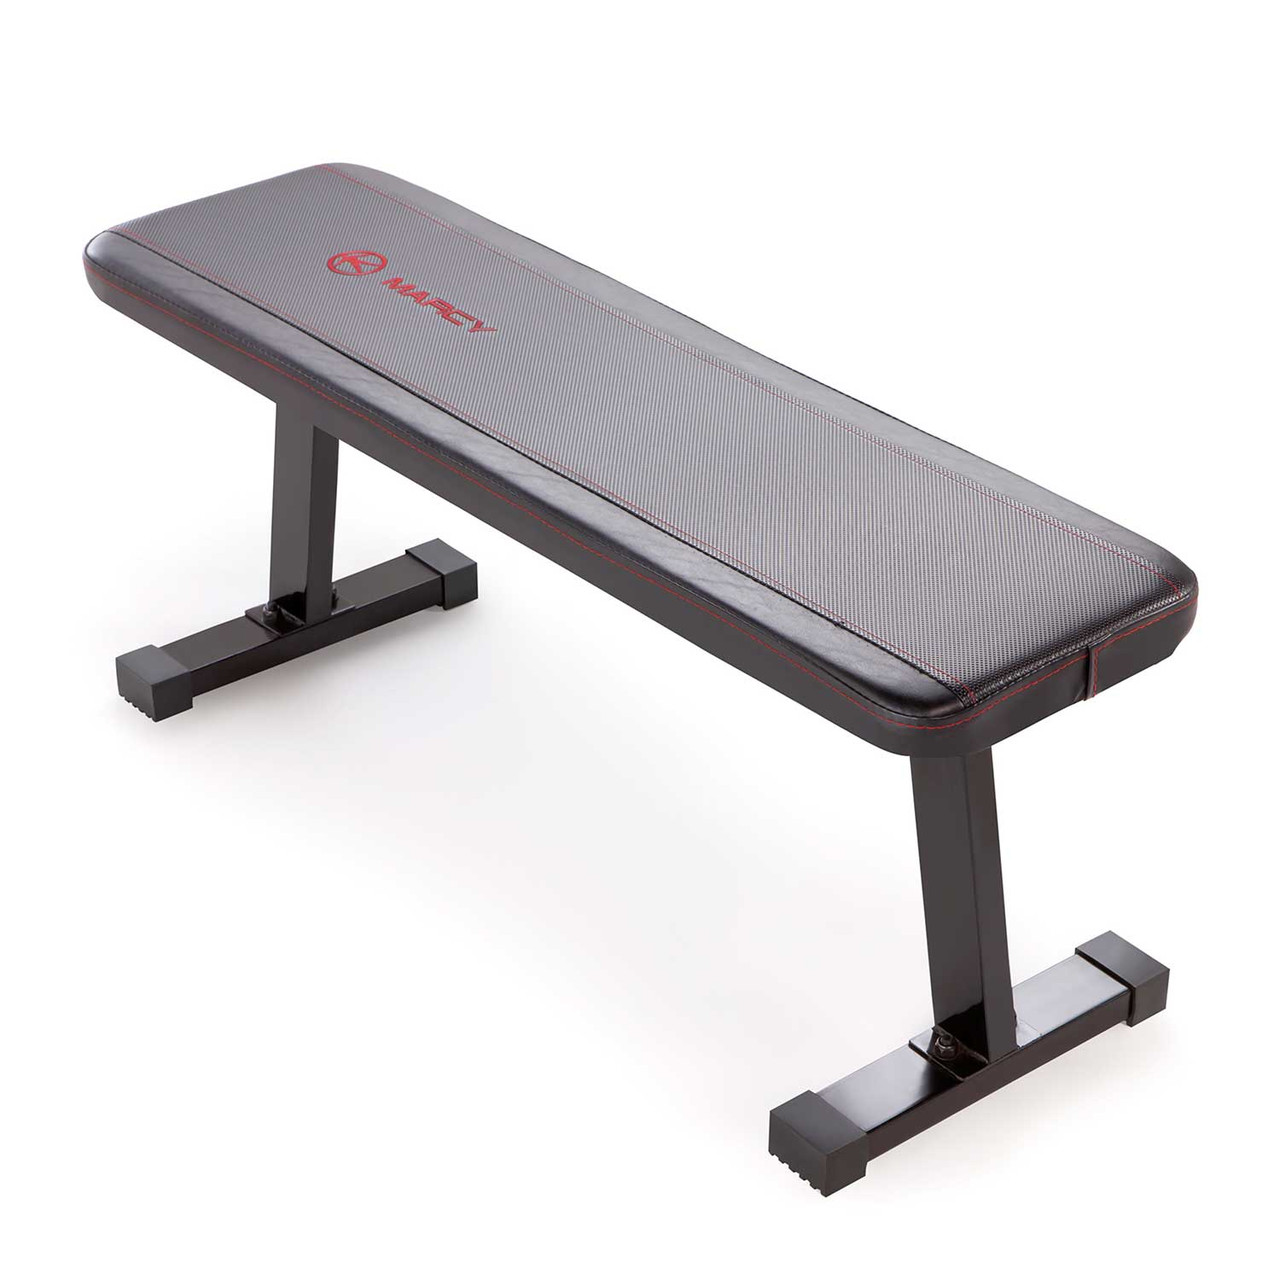 Utility Flat Bench | Marcy SB-315 Quality Strength Products